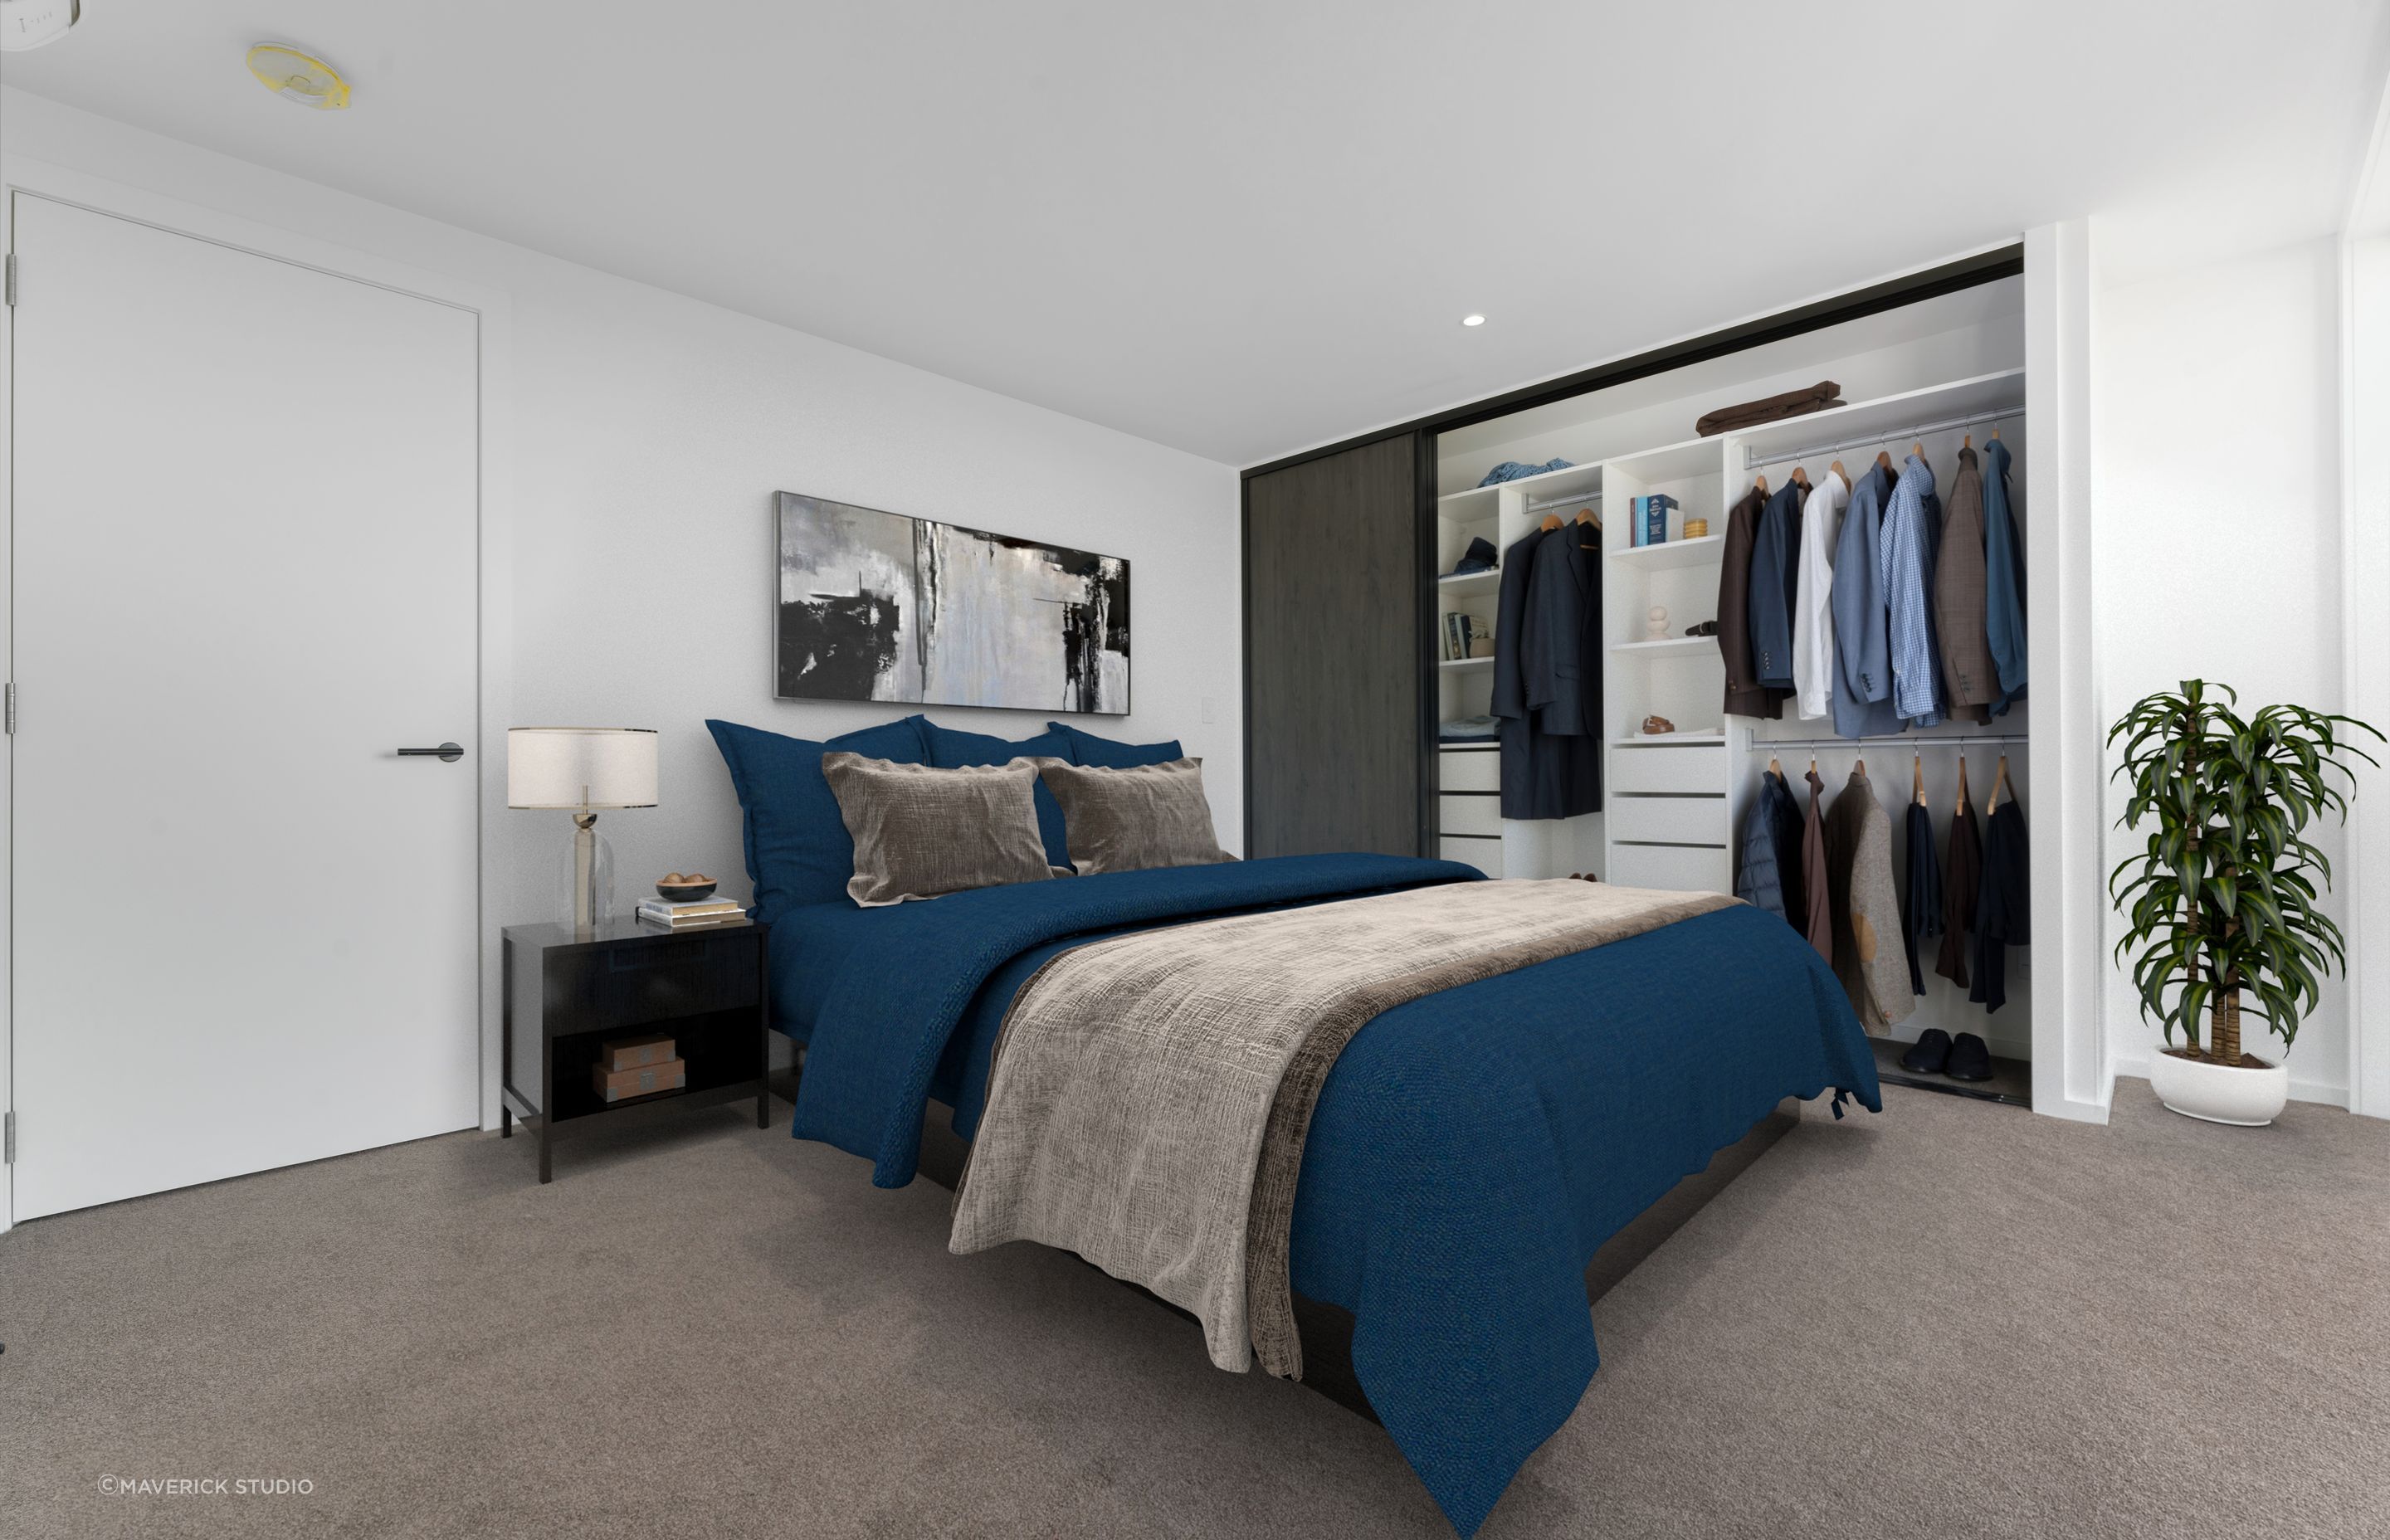 Boston Wardrobes anticipates that homeowners will make storage a feature of rooms.